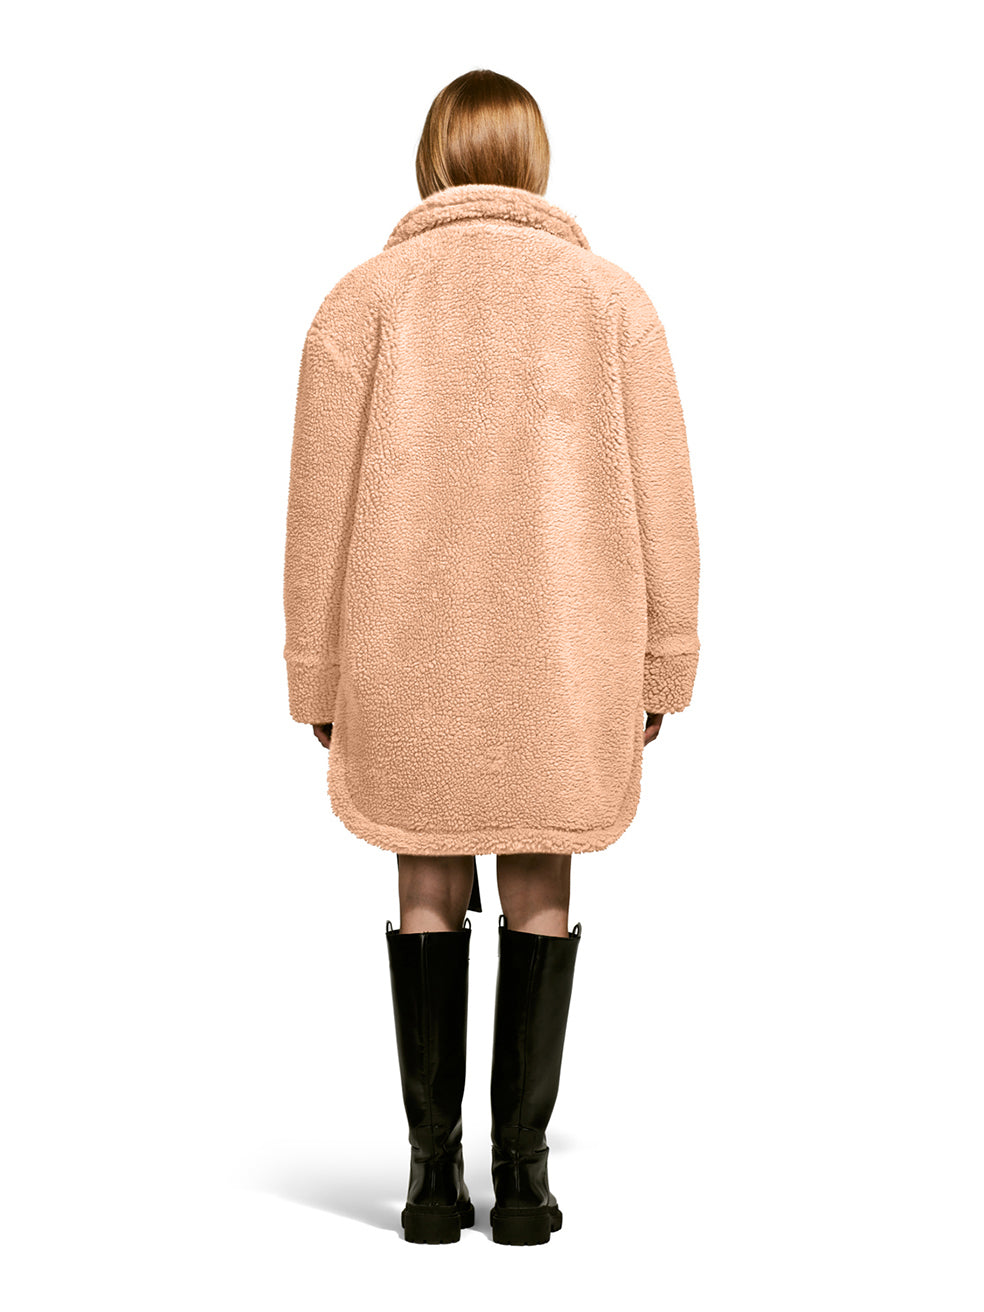 Model wearing the Ash, a teddy-inspired faux-fur sherpa shell with a laid-back silhouette in Camel from the rear.